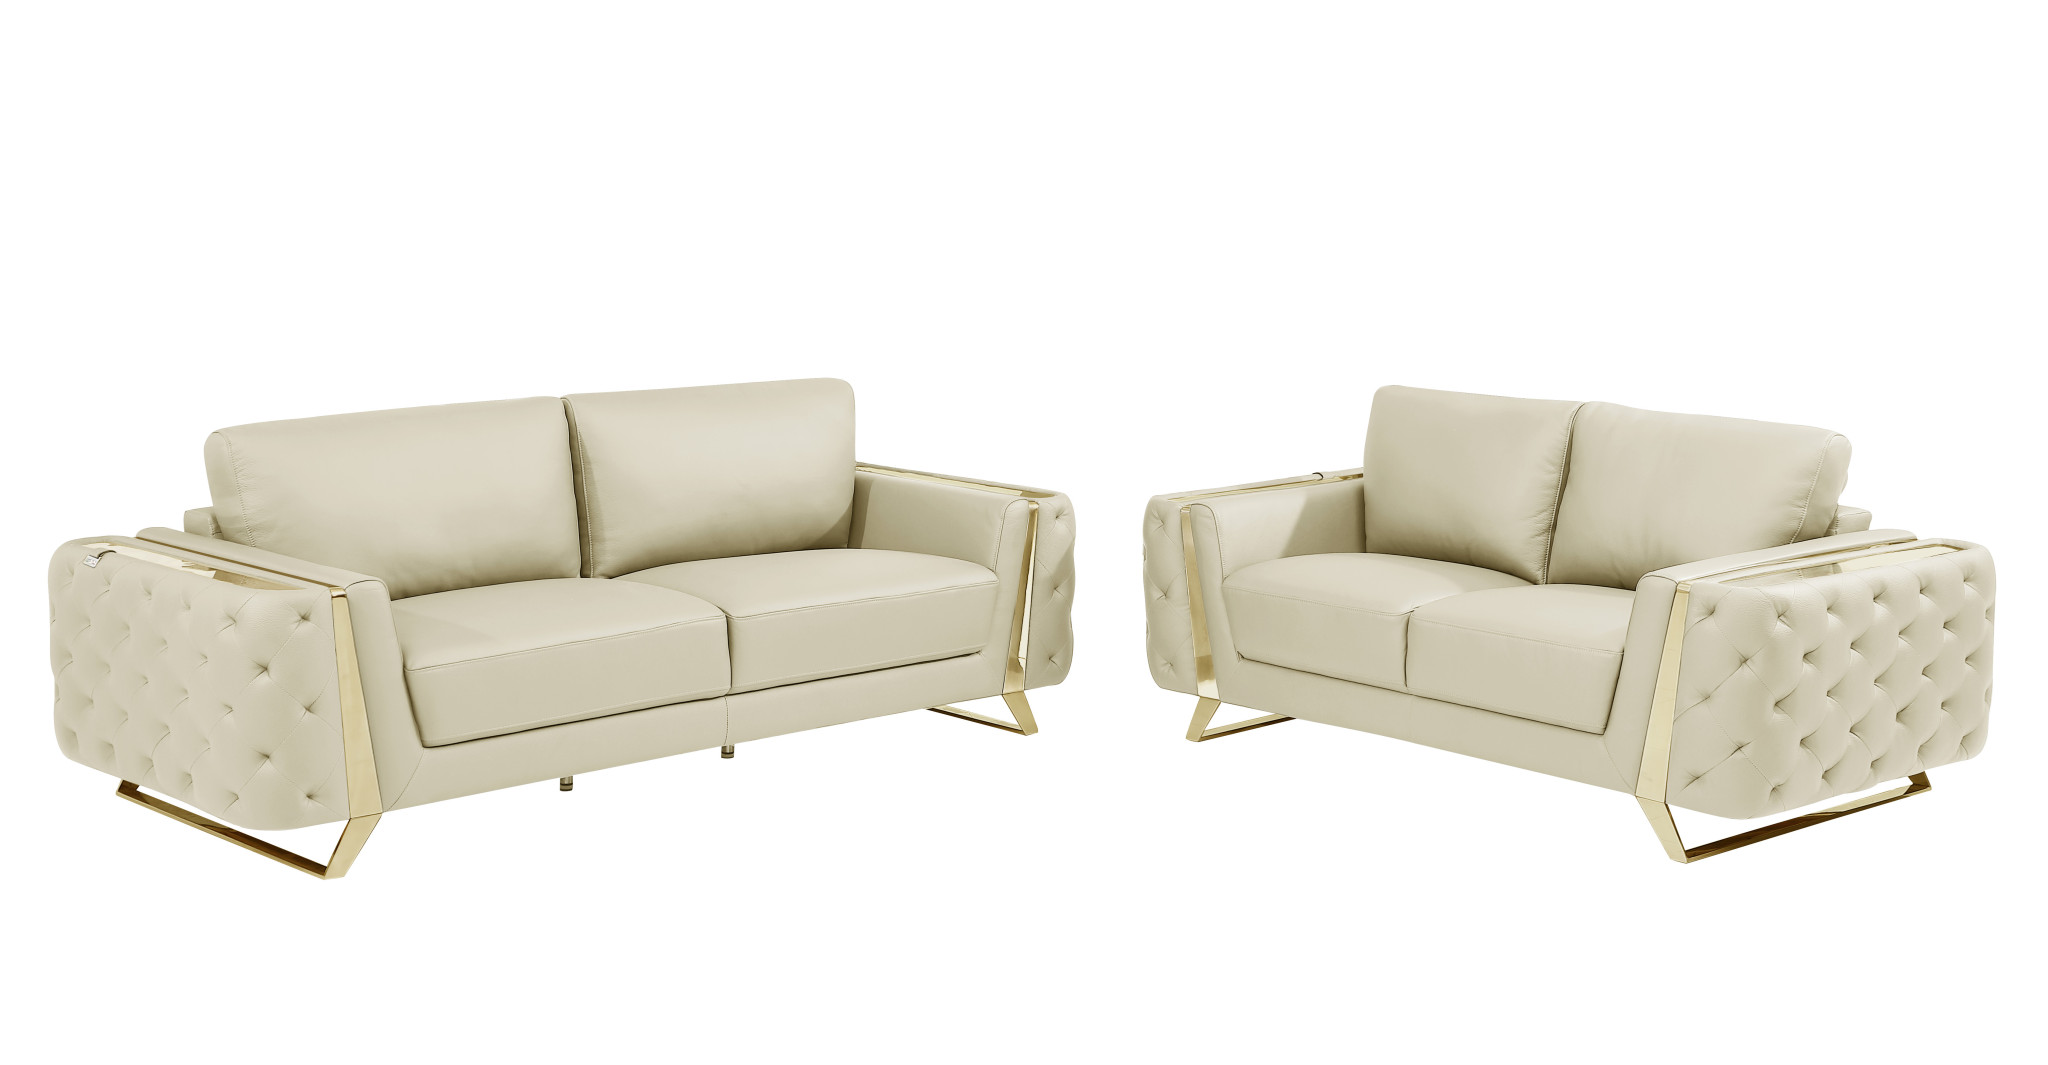 Two Piece Indoor Beige Italian Leather Five Person Seating Set-518557-1